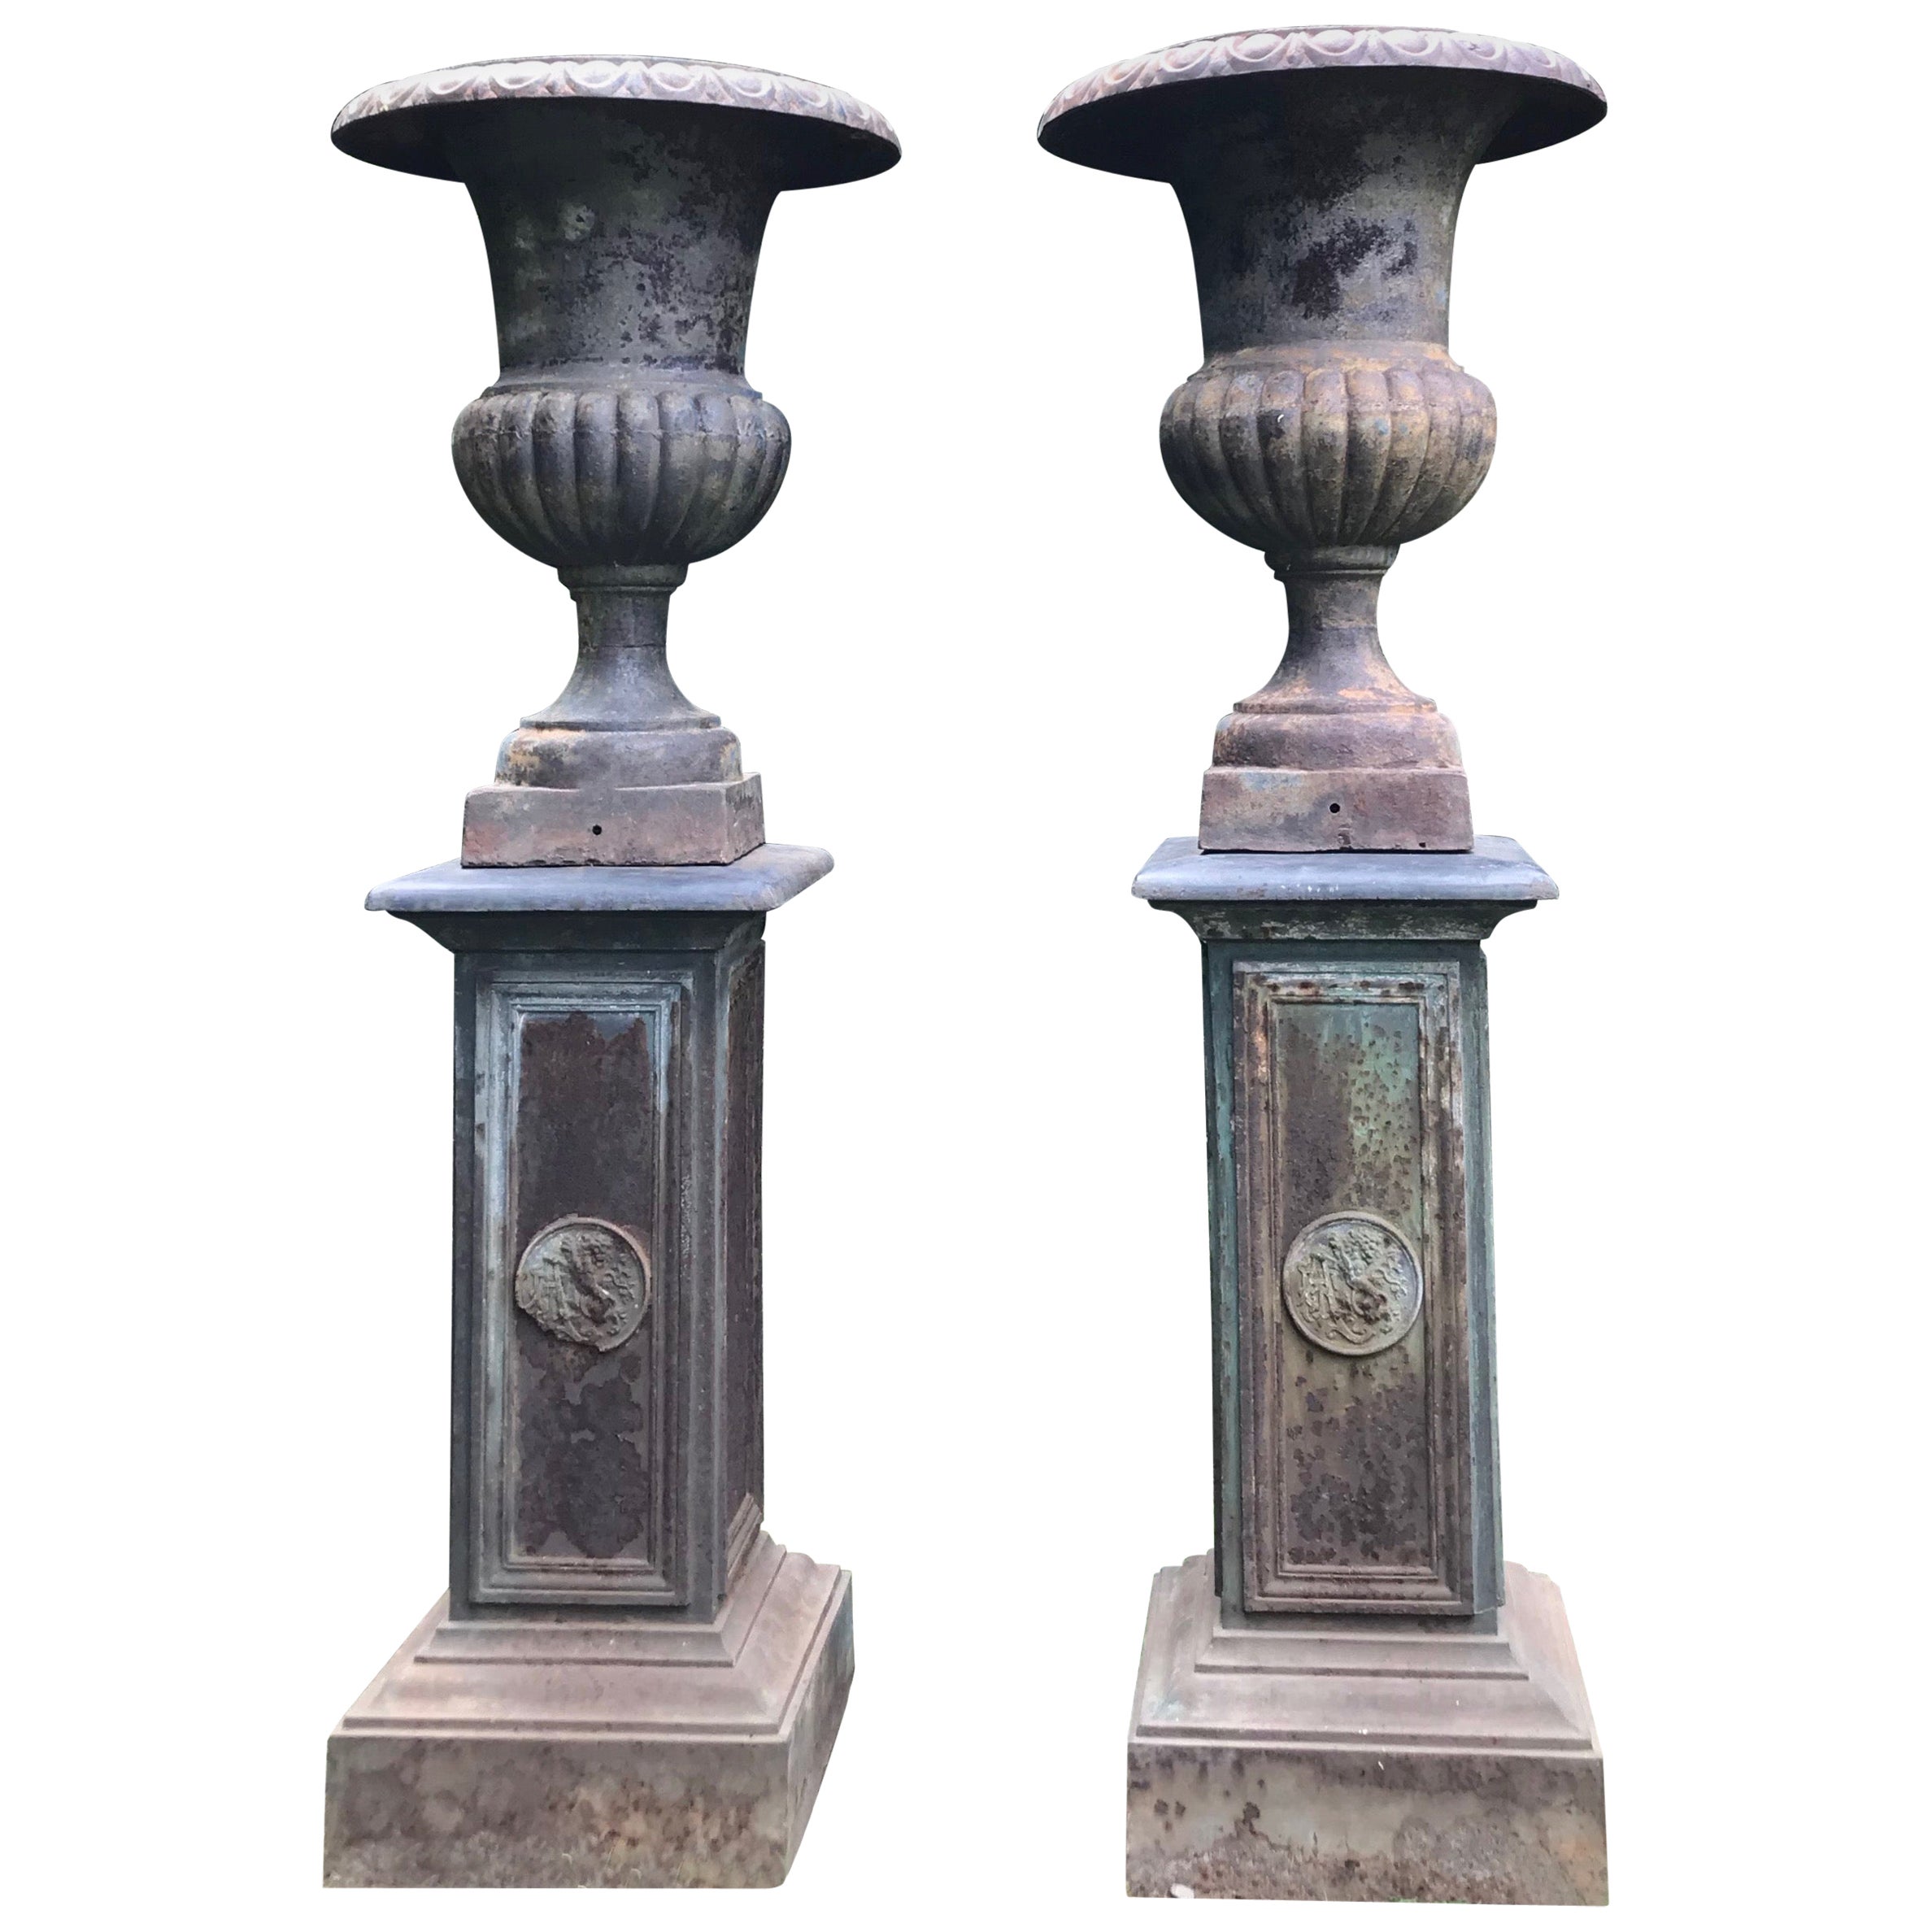 Pair of Tall Cast Iron Medici Urns on Pedestals with French Republic Medallions For Sale